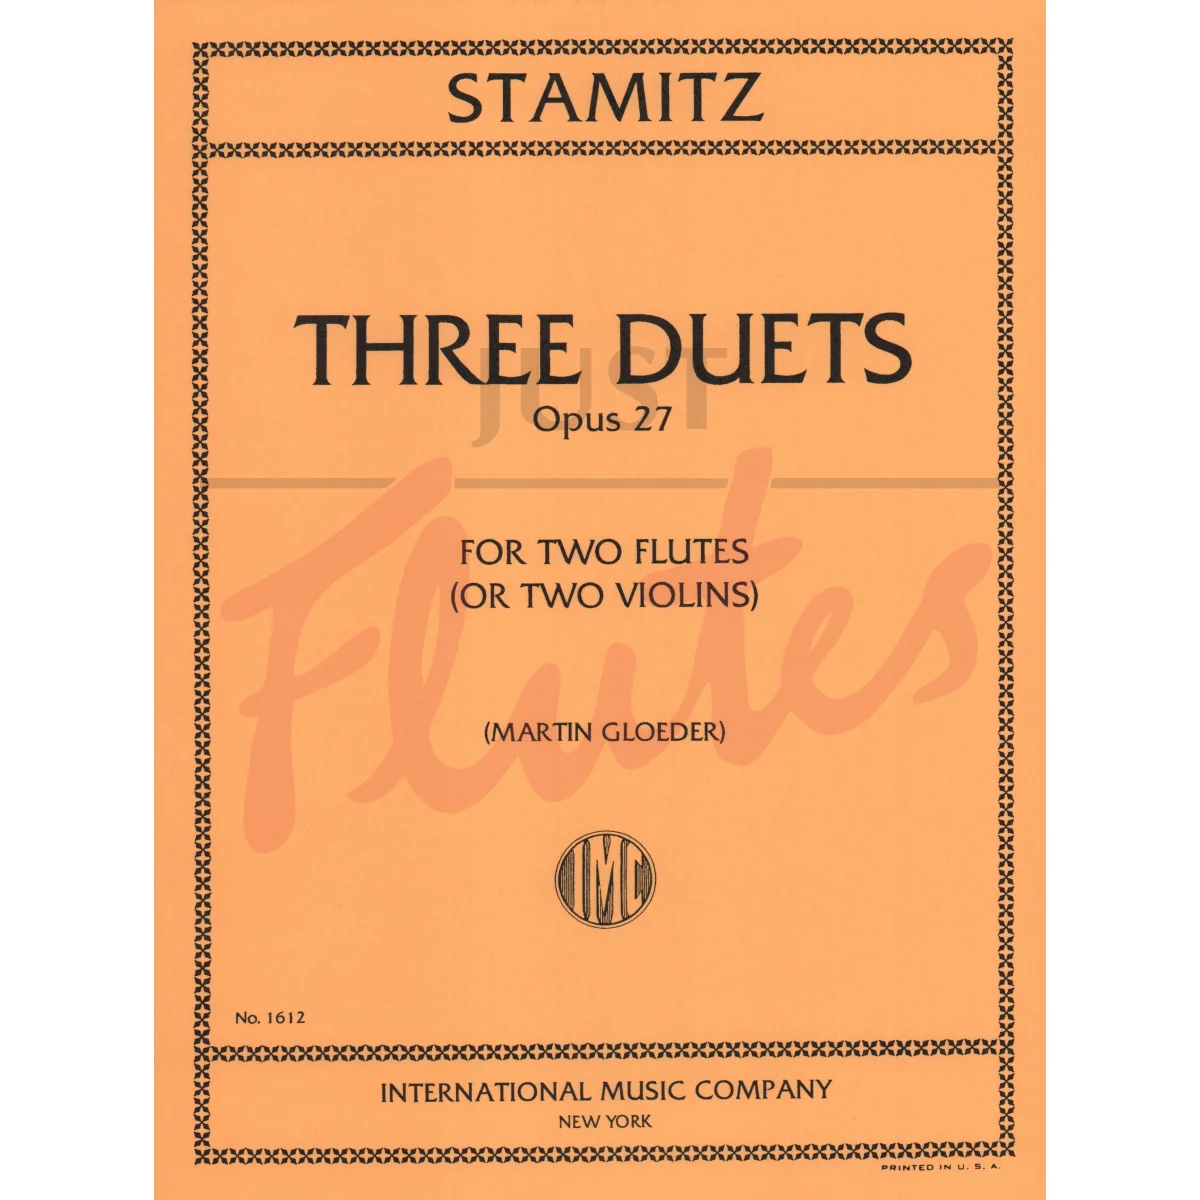 Three Duets for Two Flutes